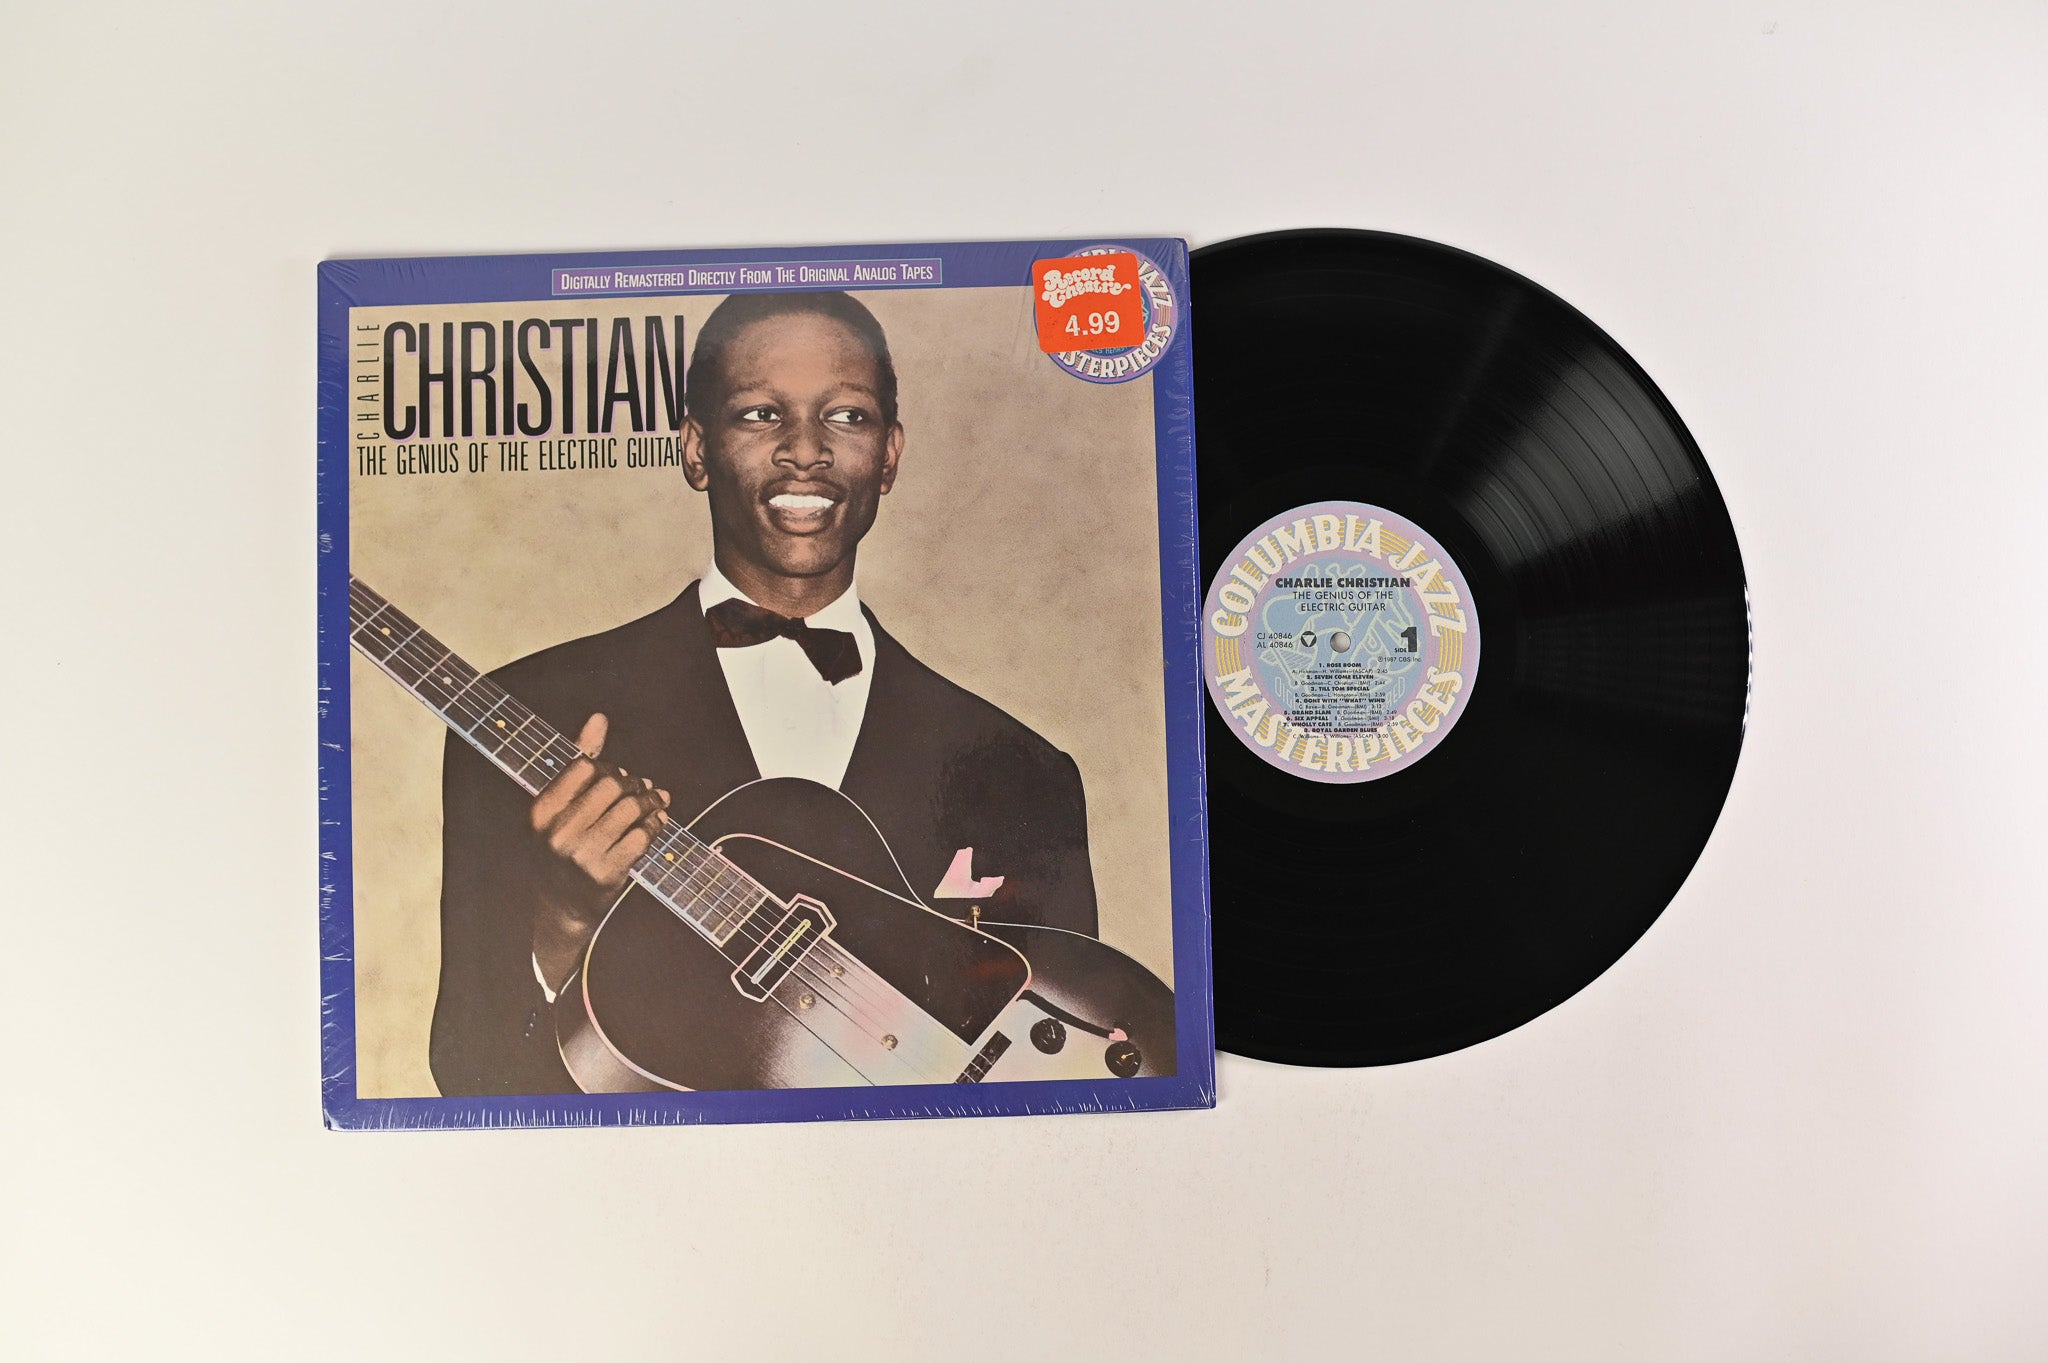 Charlie Christian - The Genius Of The Electric Guitar on Columbia